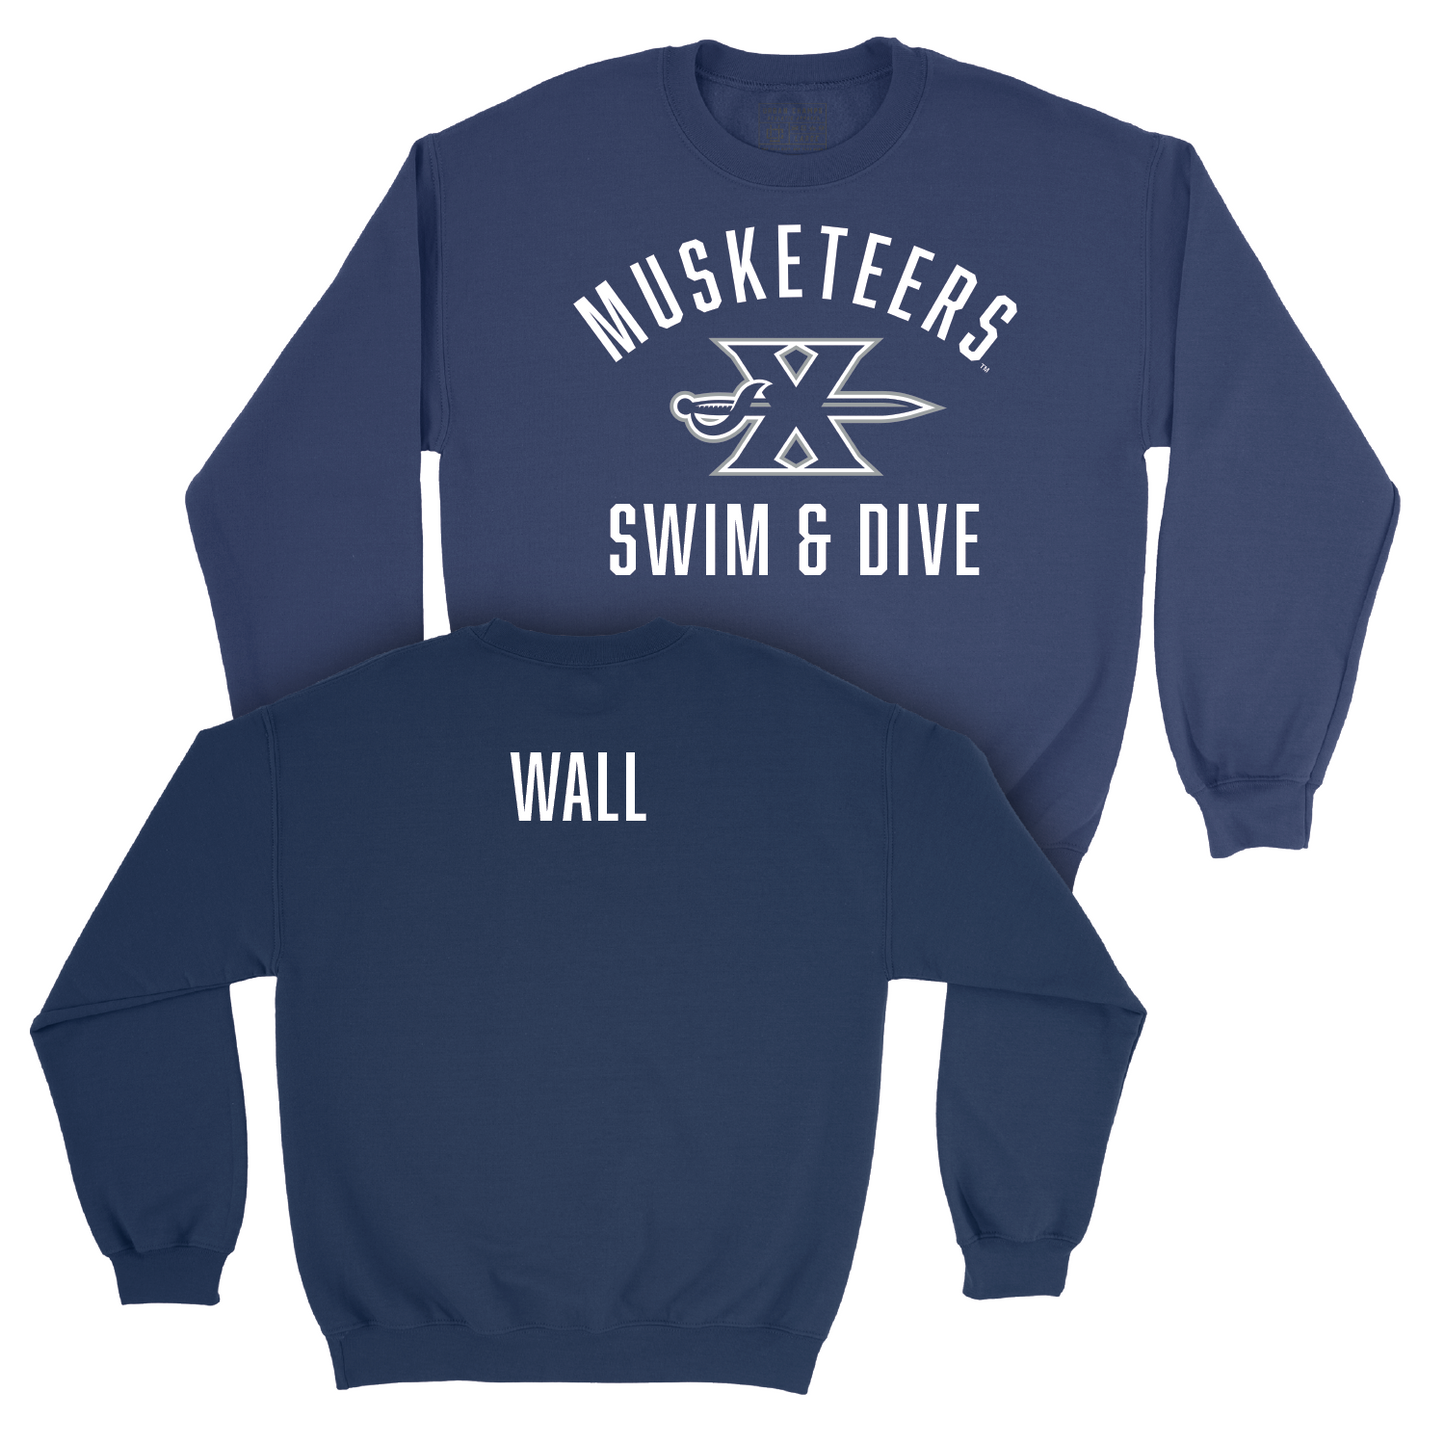 Men's Swim & Dive Navy Classic Crew - Nathan Wall Youth Small